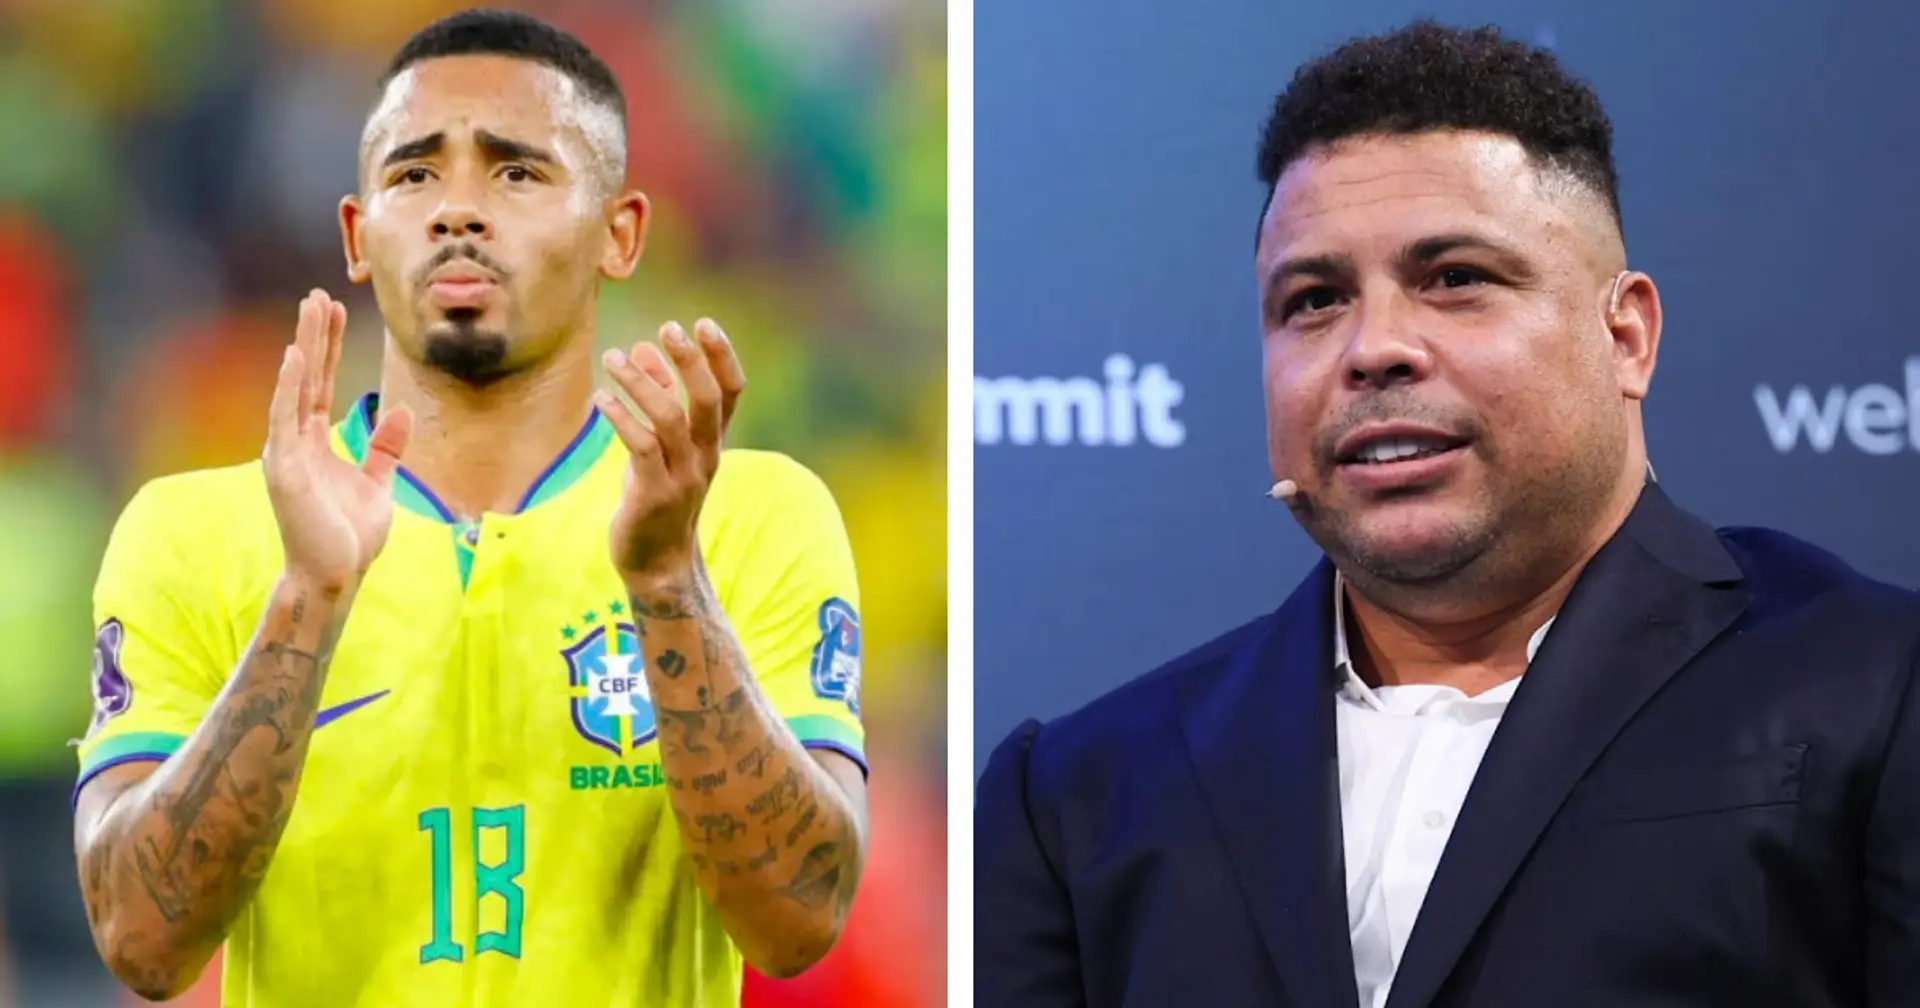 'The goals will come out naturally': Ronaldo Nazario backs Gabriel Jesus to deliver for Brazil